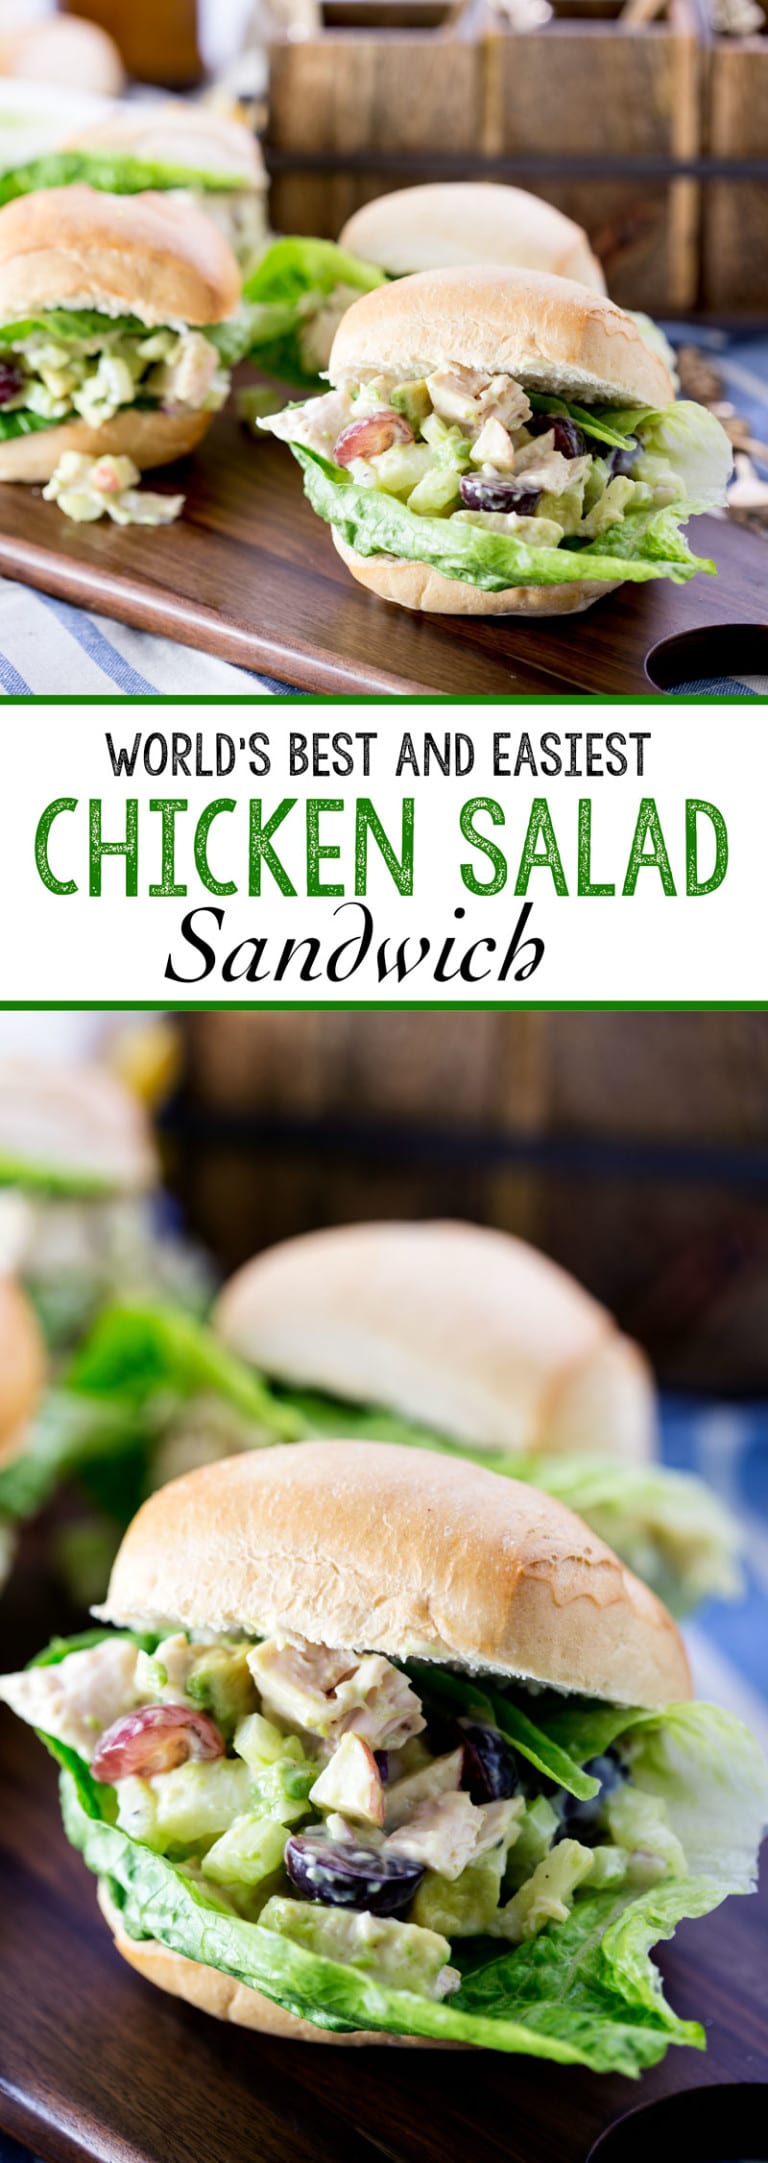 Best and Easiest Chicken Salad Sandwich - Easy Peasy Meals